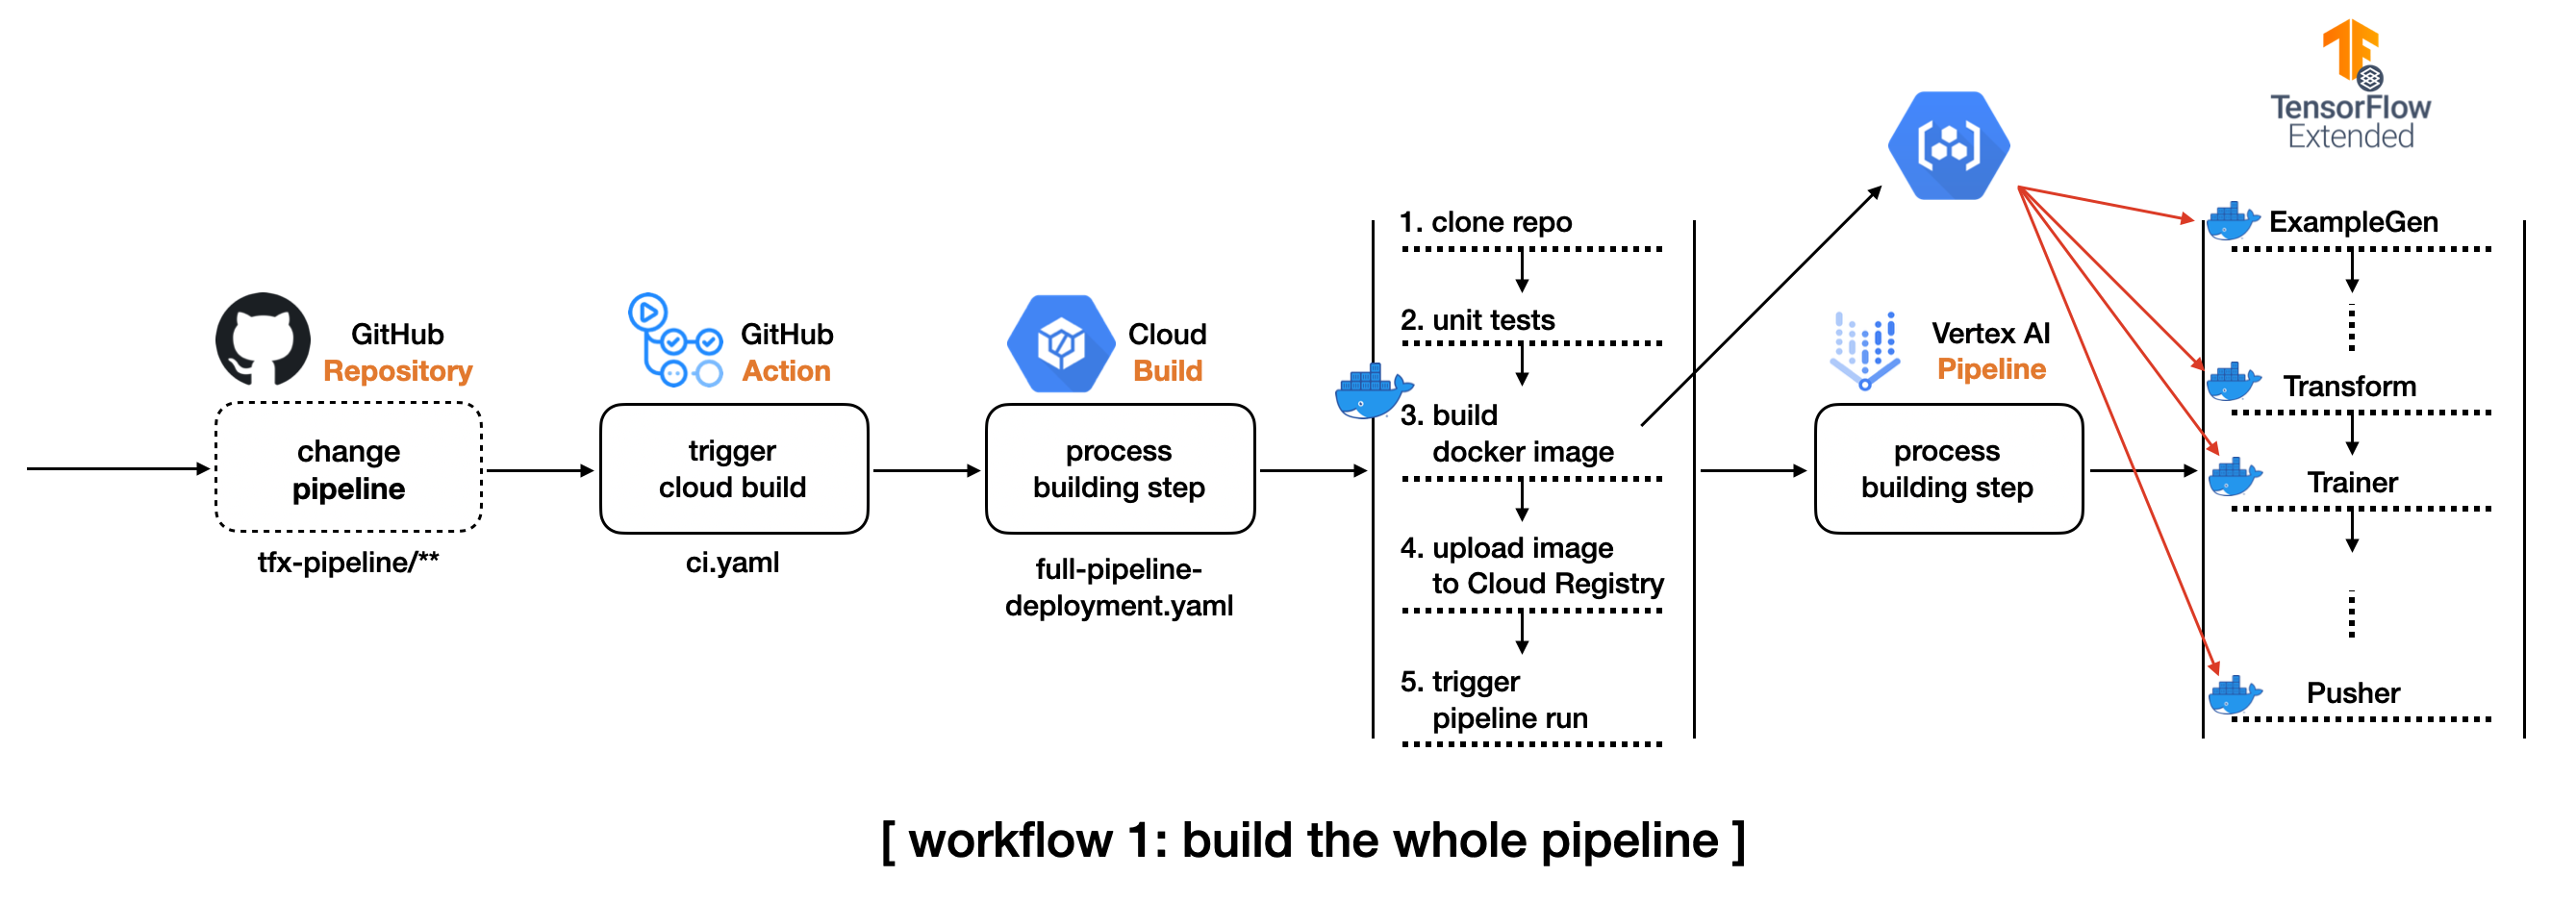 workflow1.png